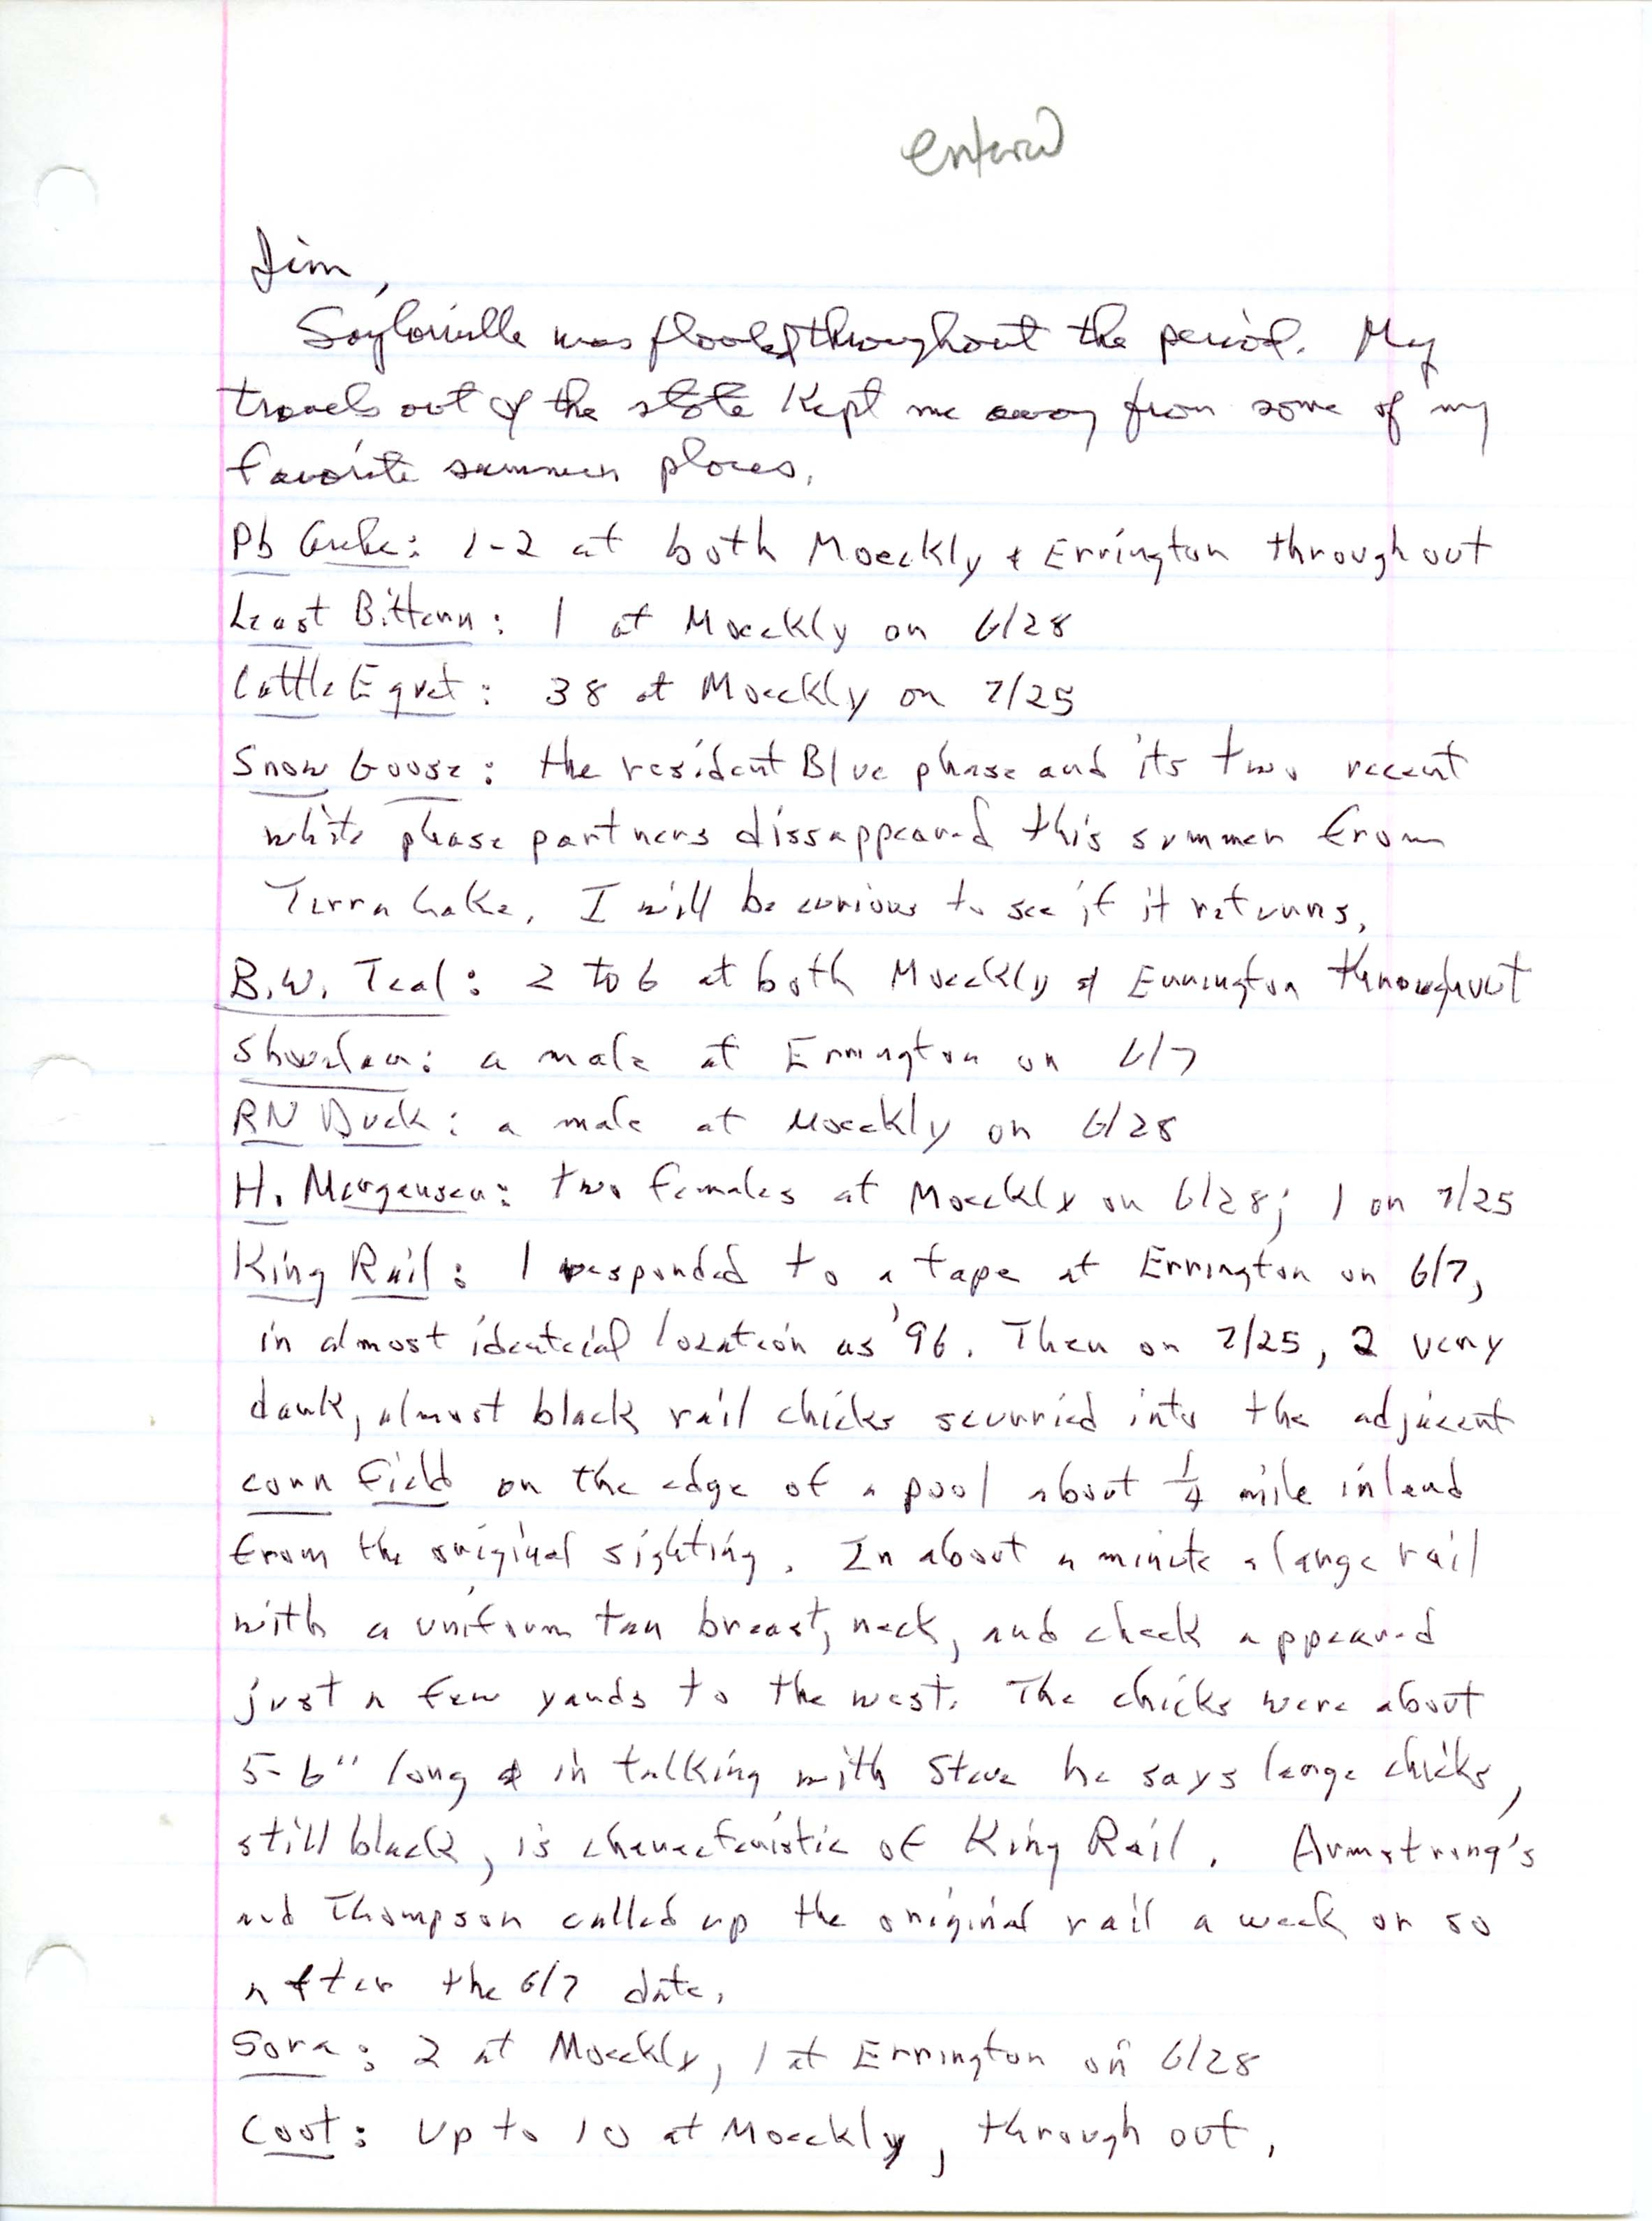 Annotated bird sighting list for summer 1998 compiled by Bery Engebretsen